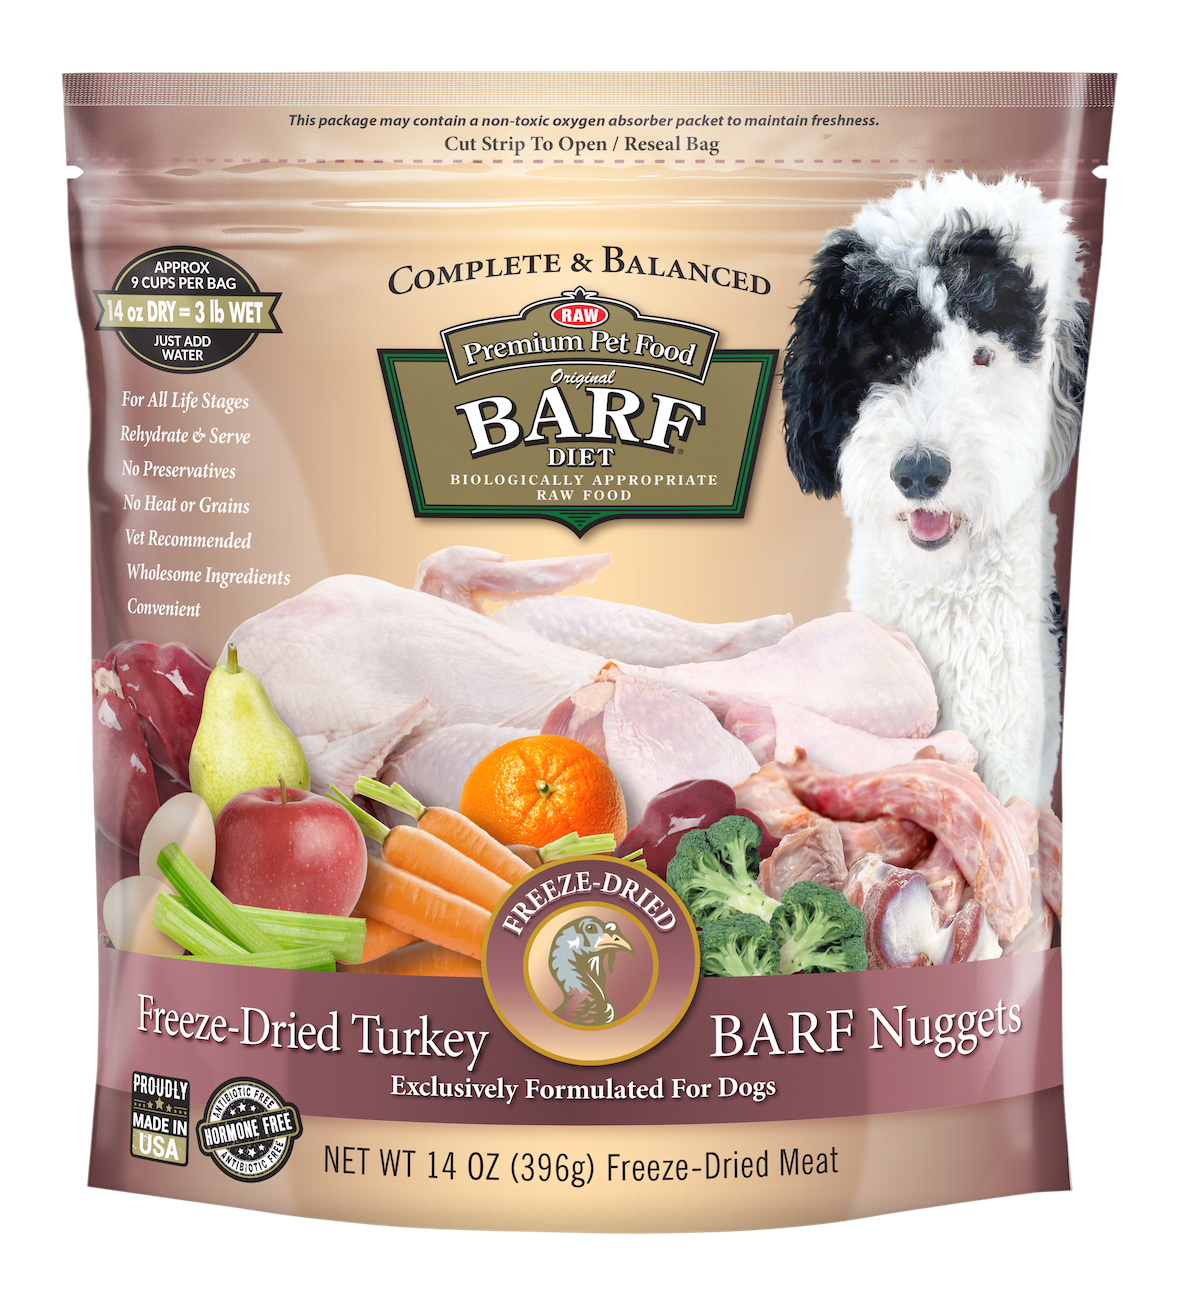 Preparing fresh raw meat for barf dog food with a mix of poultry